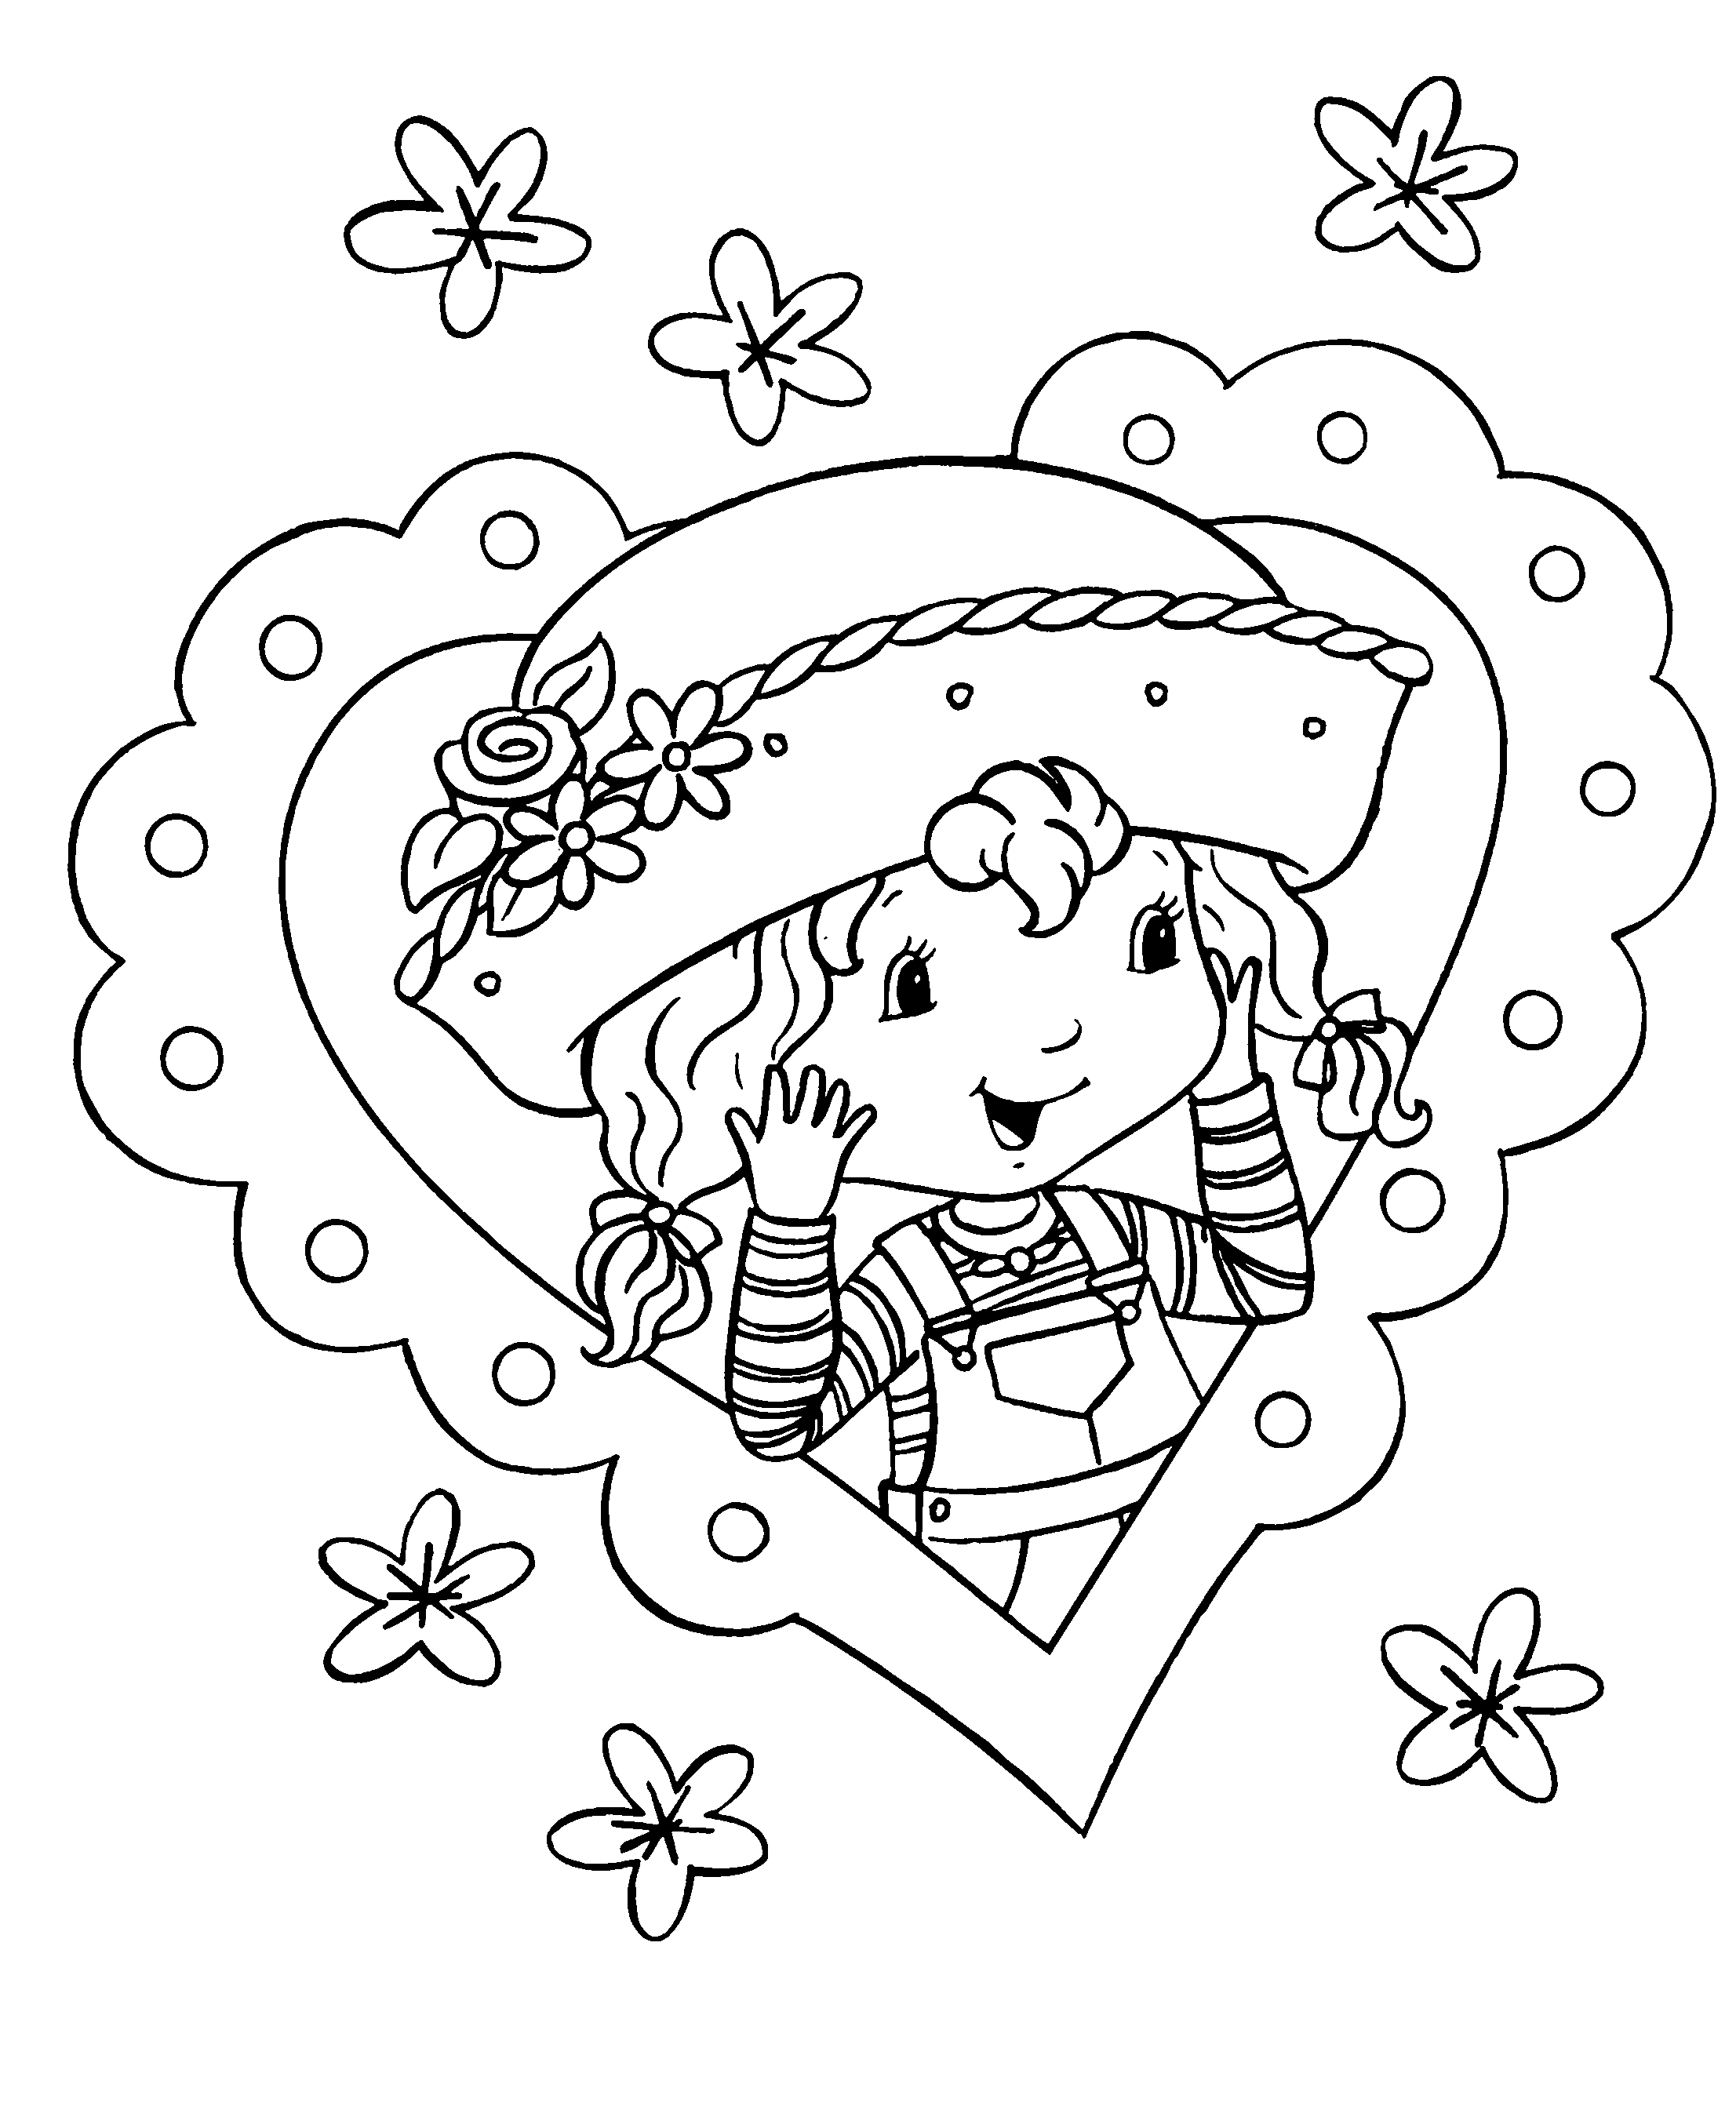  Strawberry Shortcake Coloring Pages / Cool coloring pages / 26